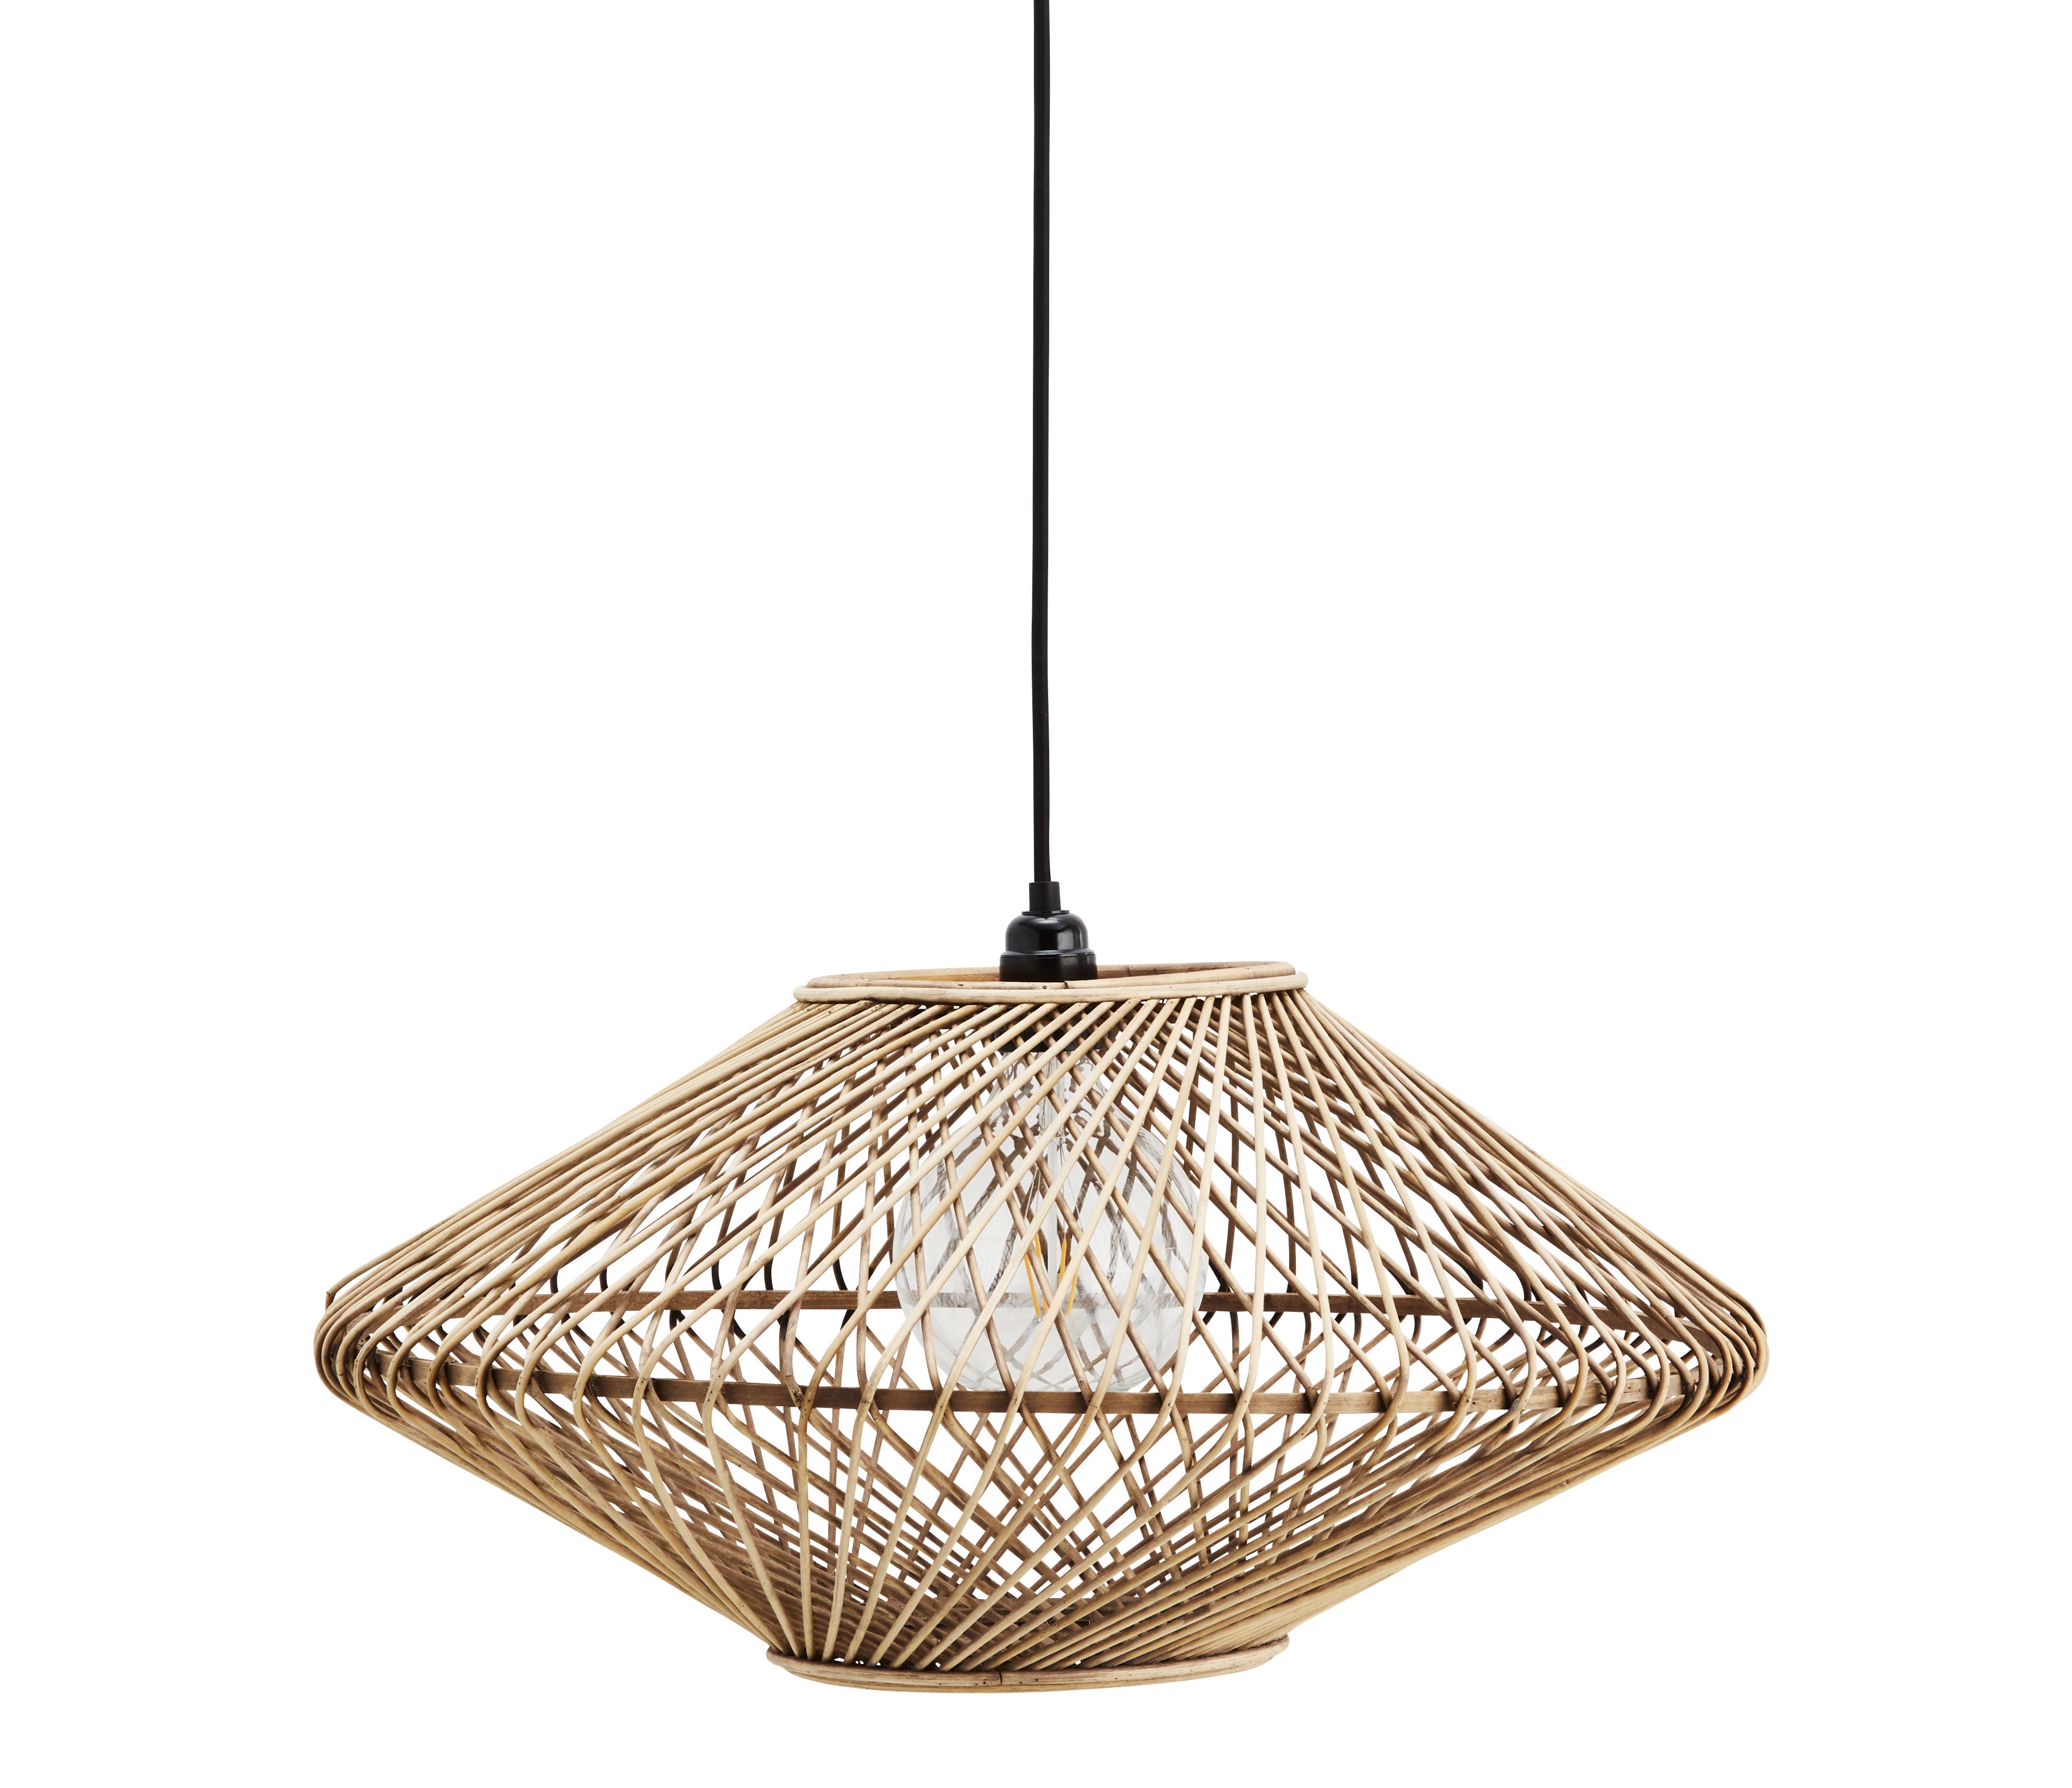 The Forest & Co. Bamboo Pendant Light